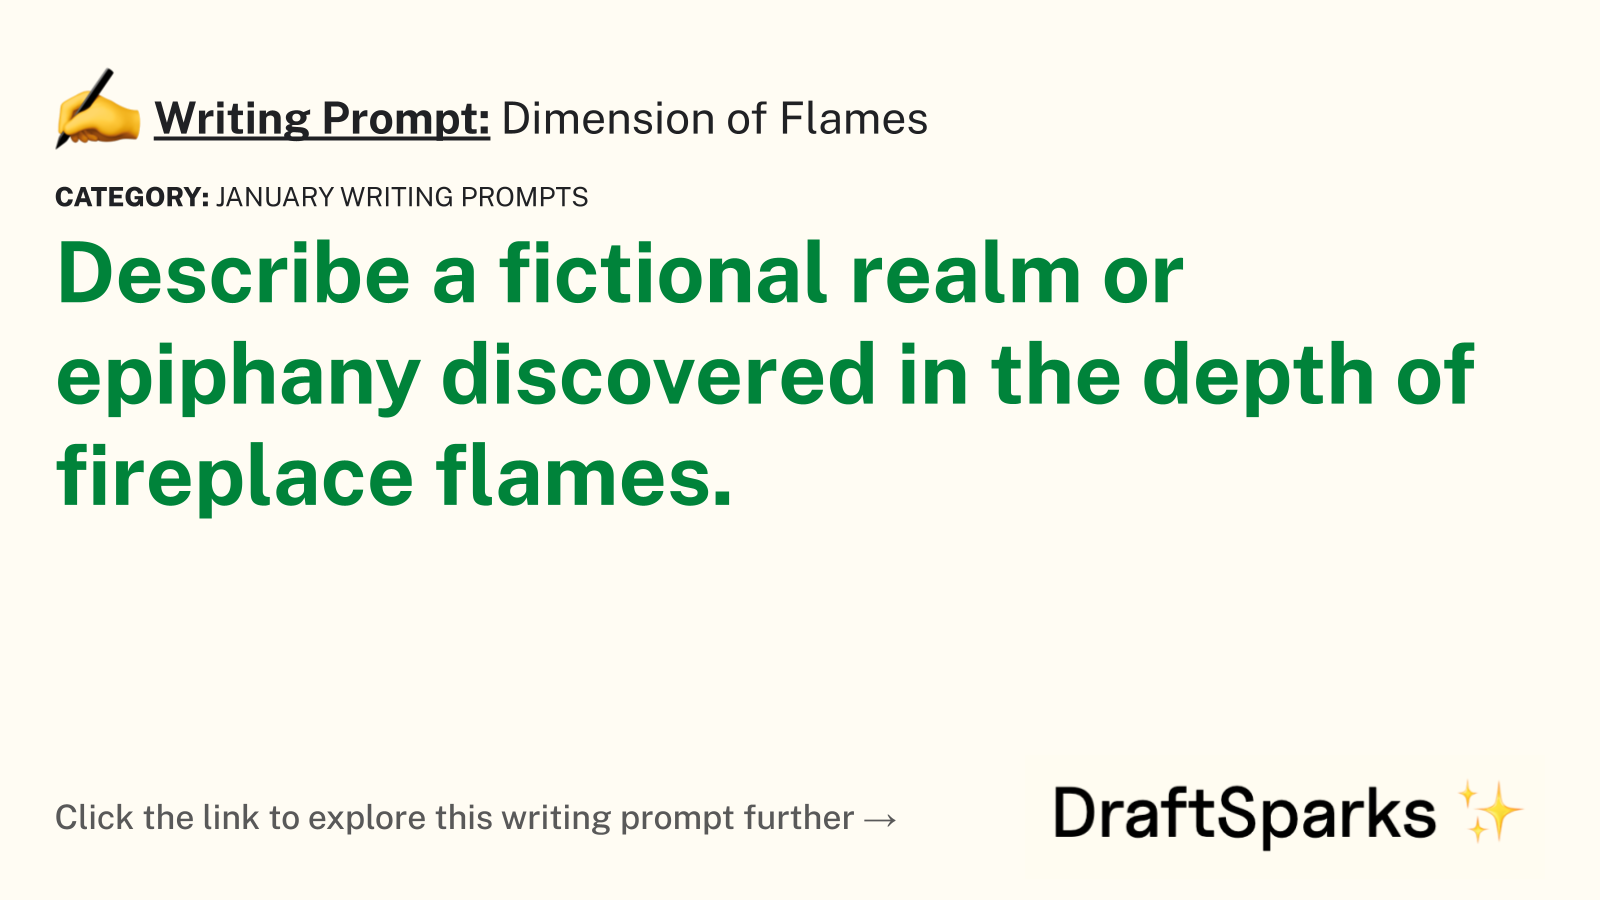 Dimension of Flames